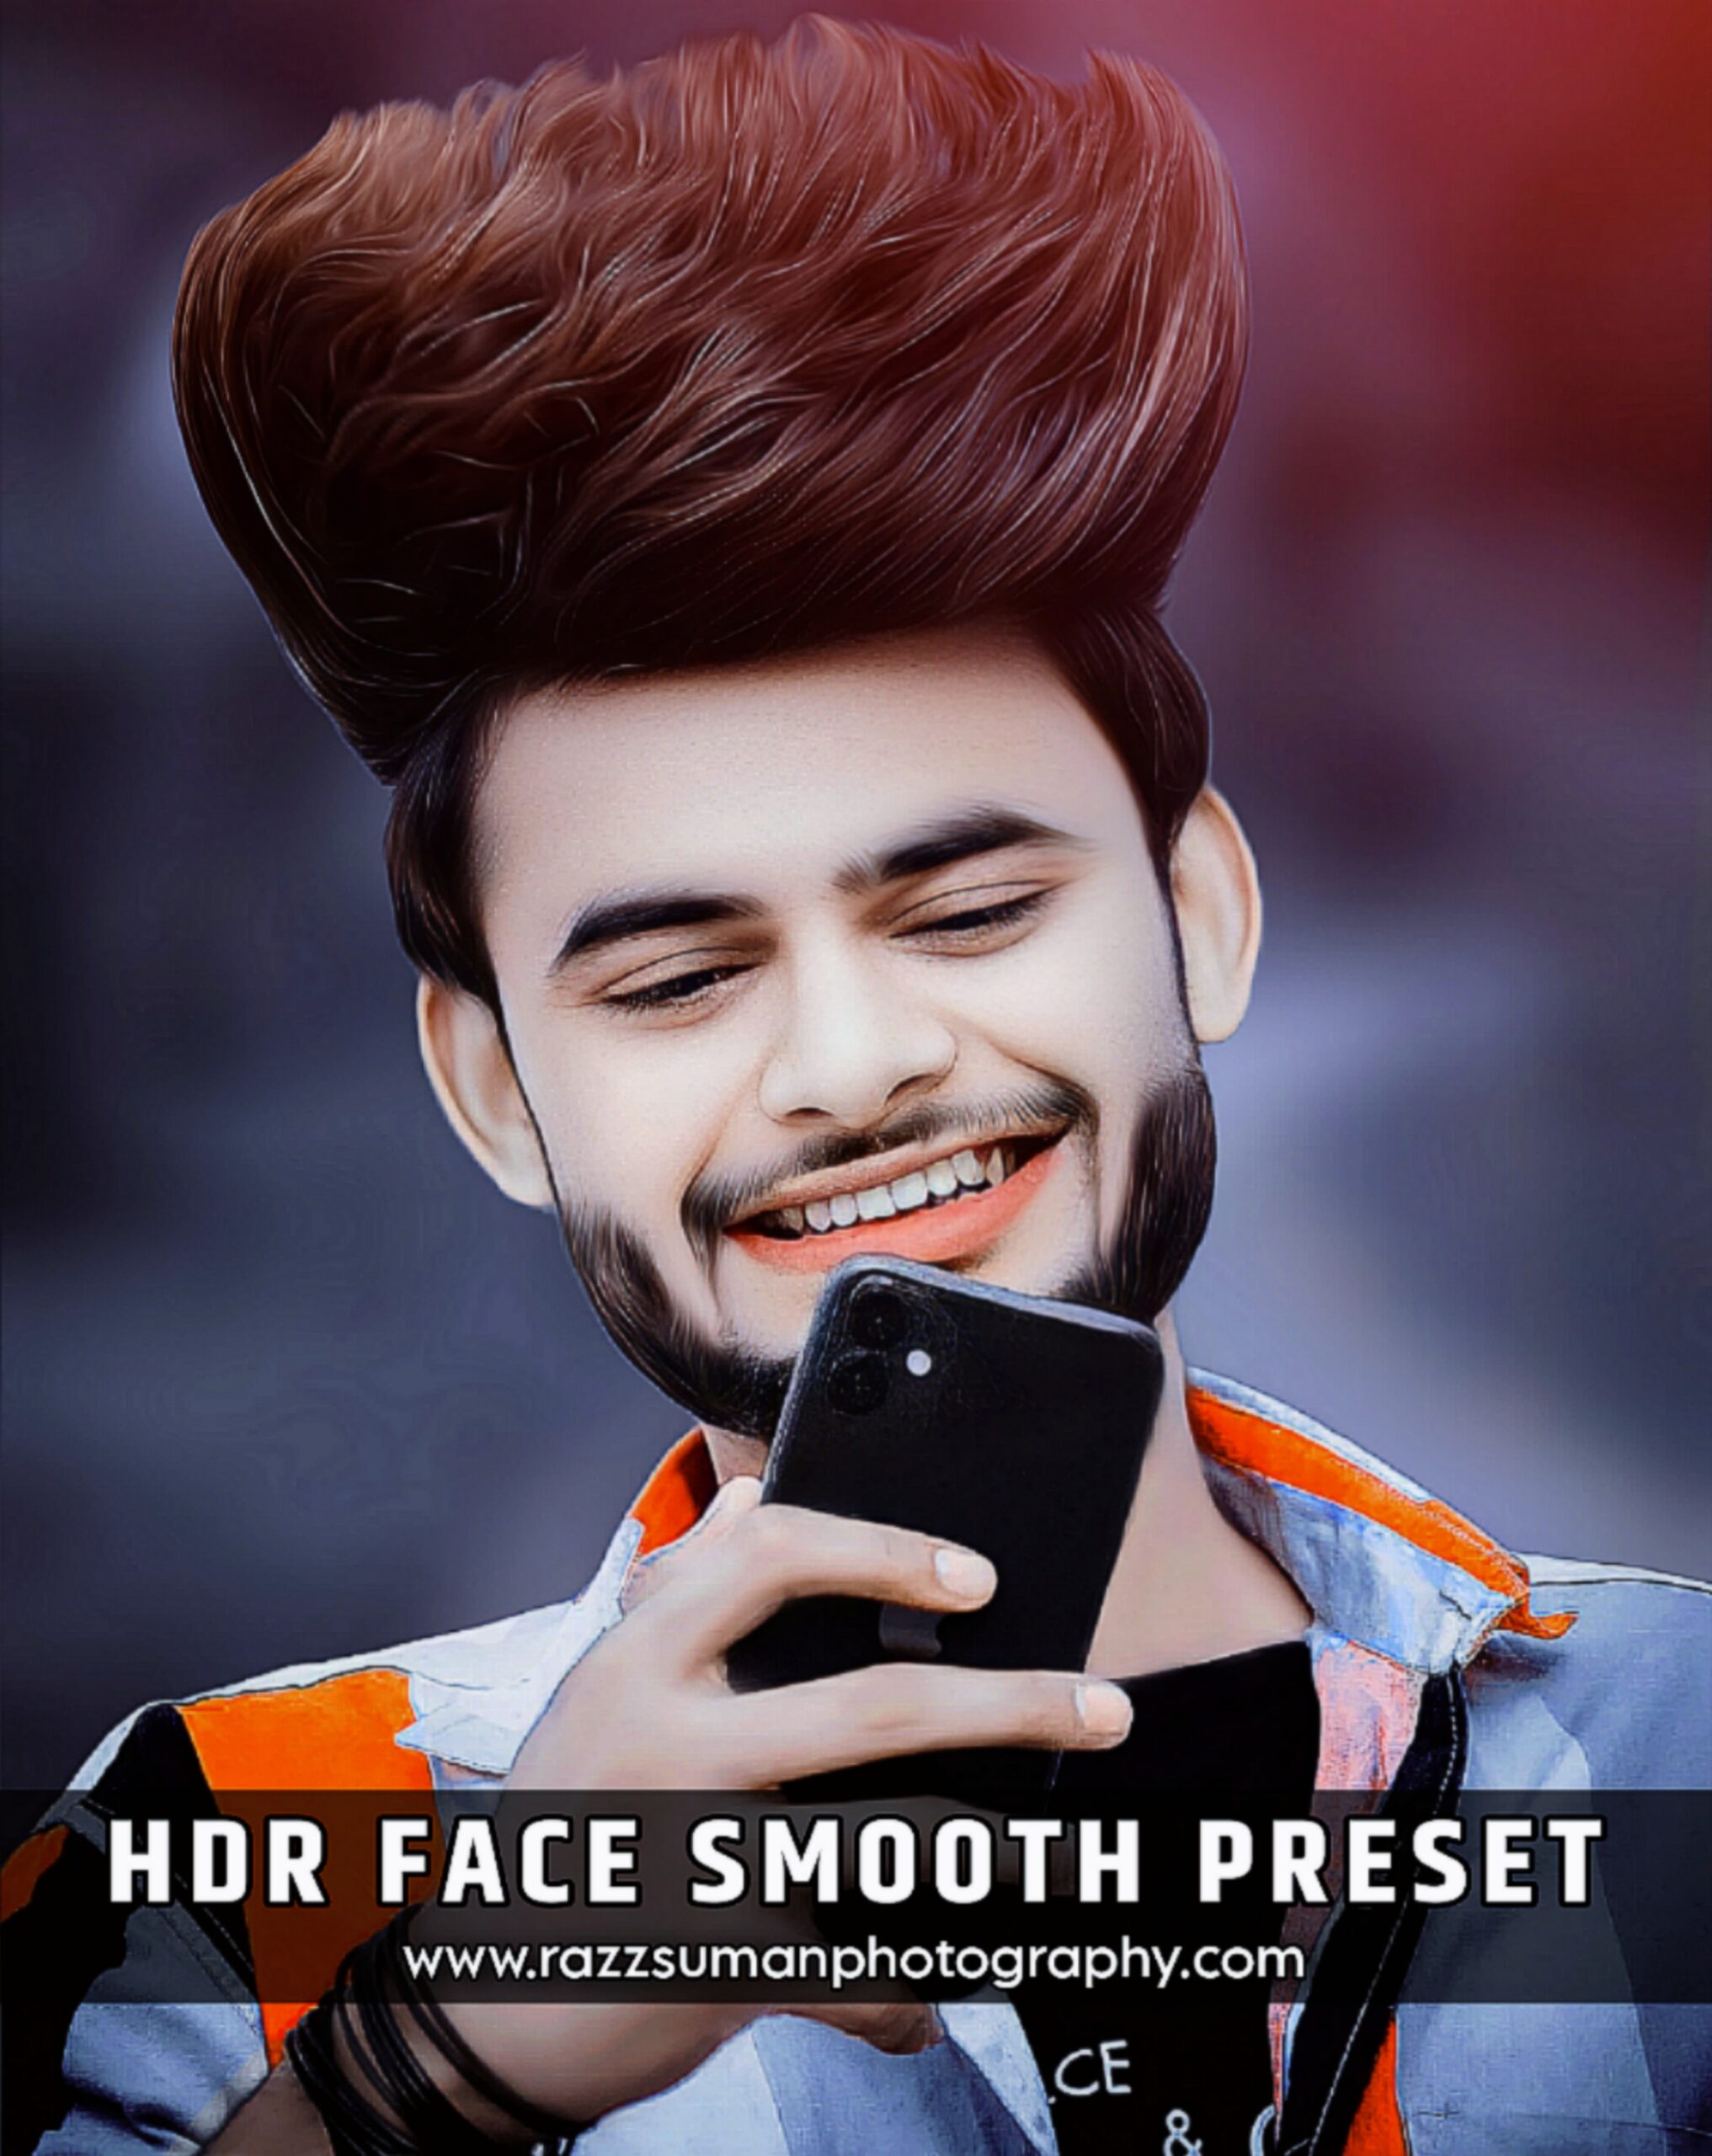 Hdr face smooth preset download